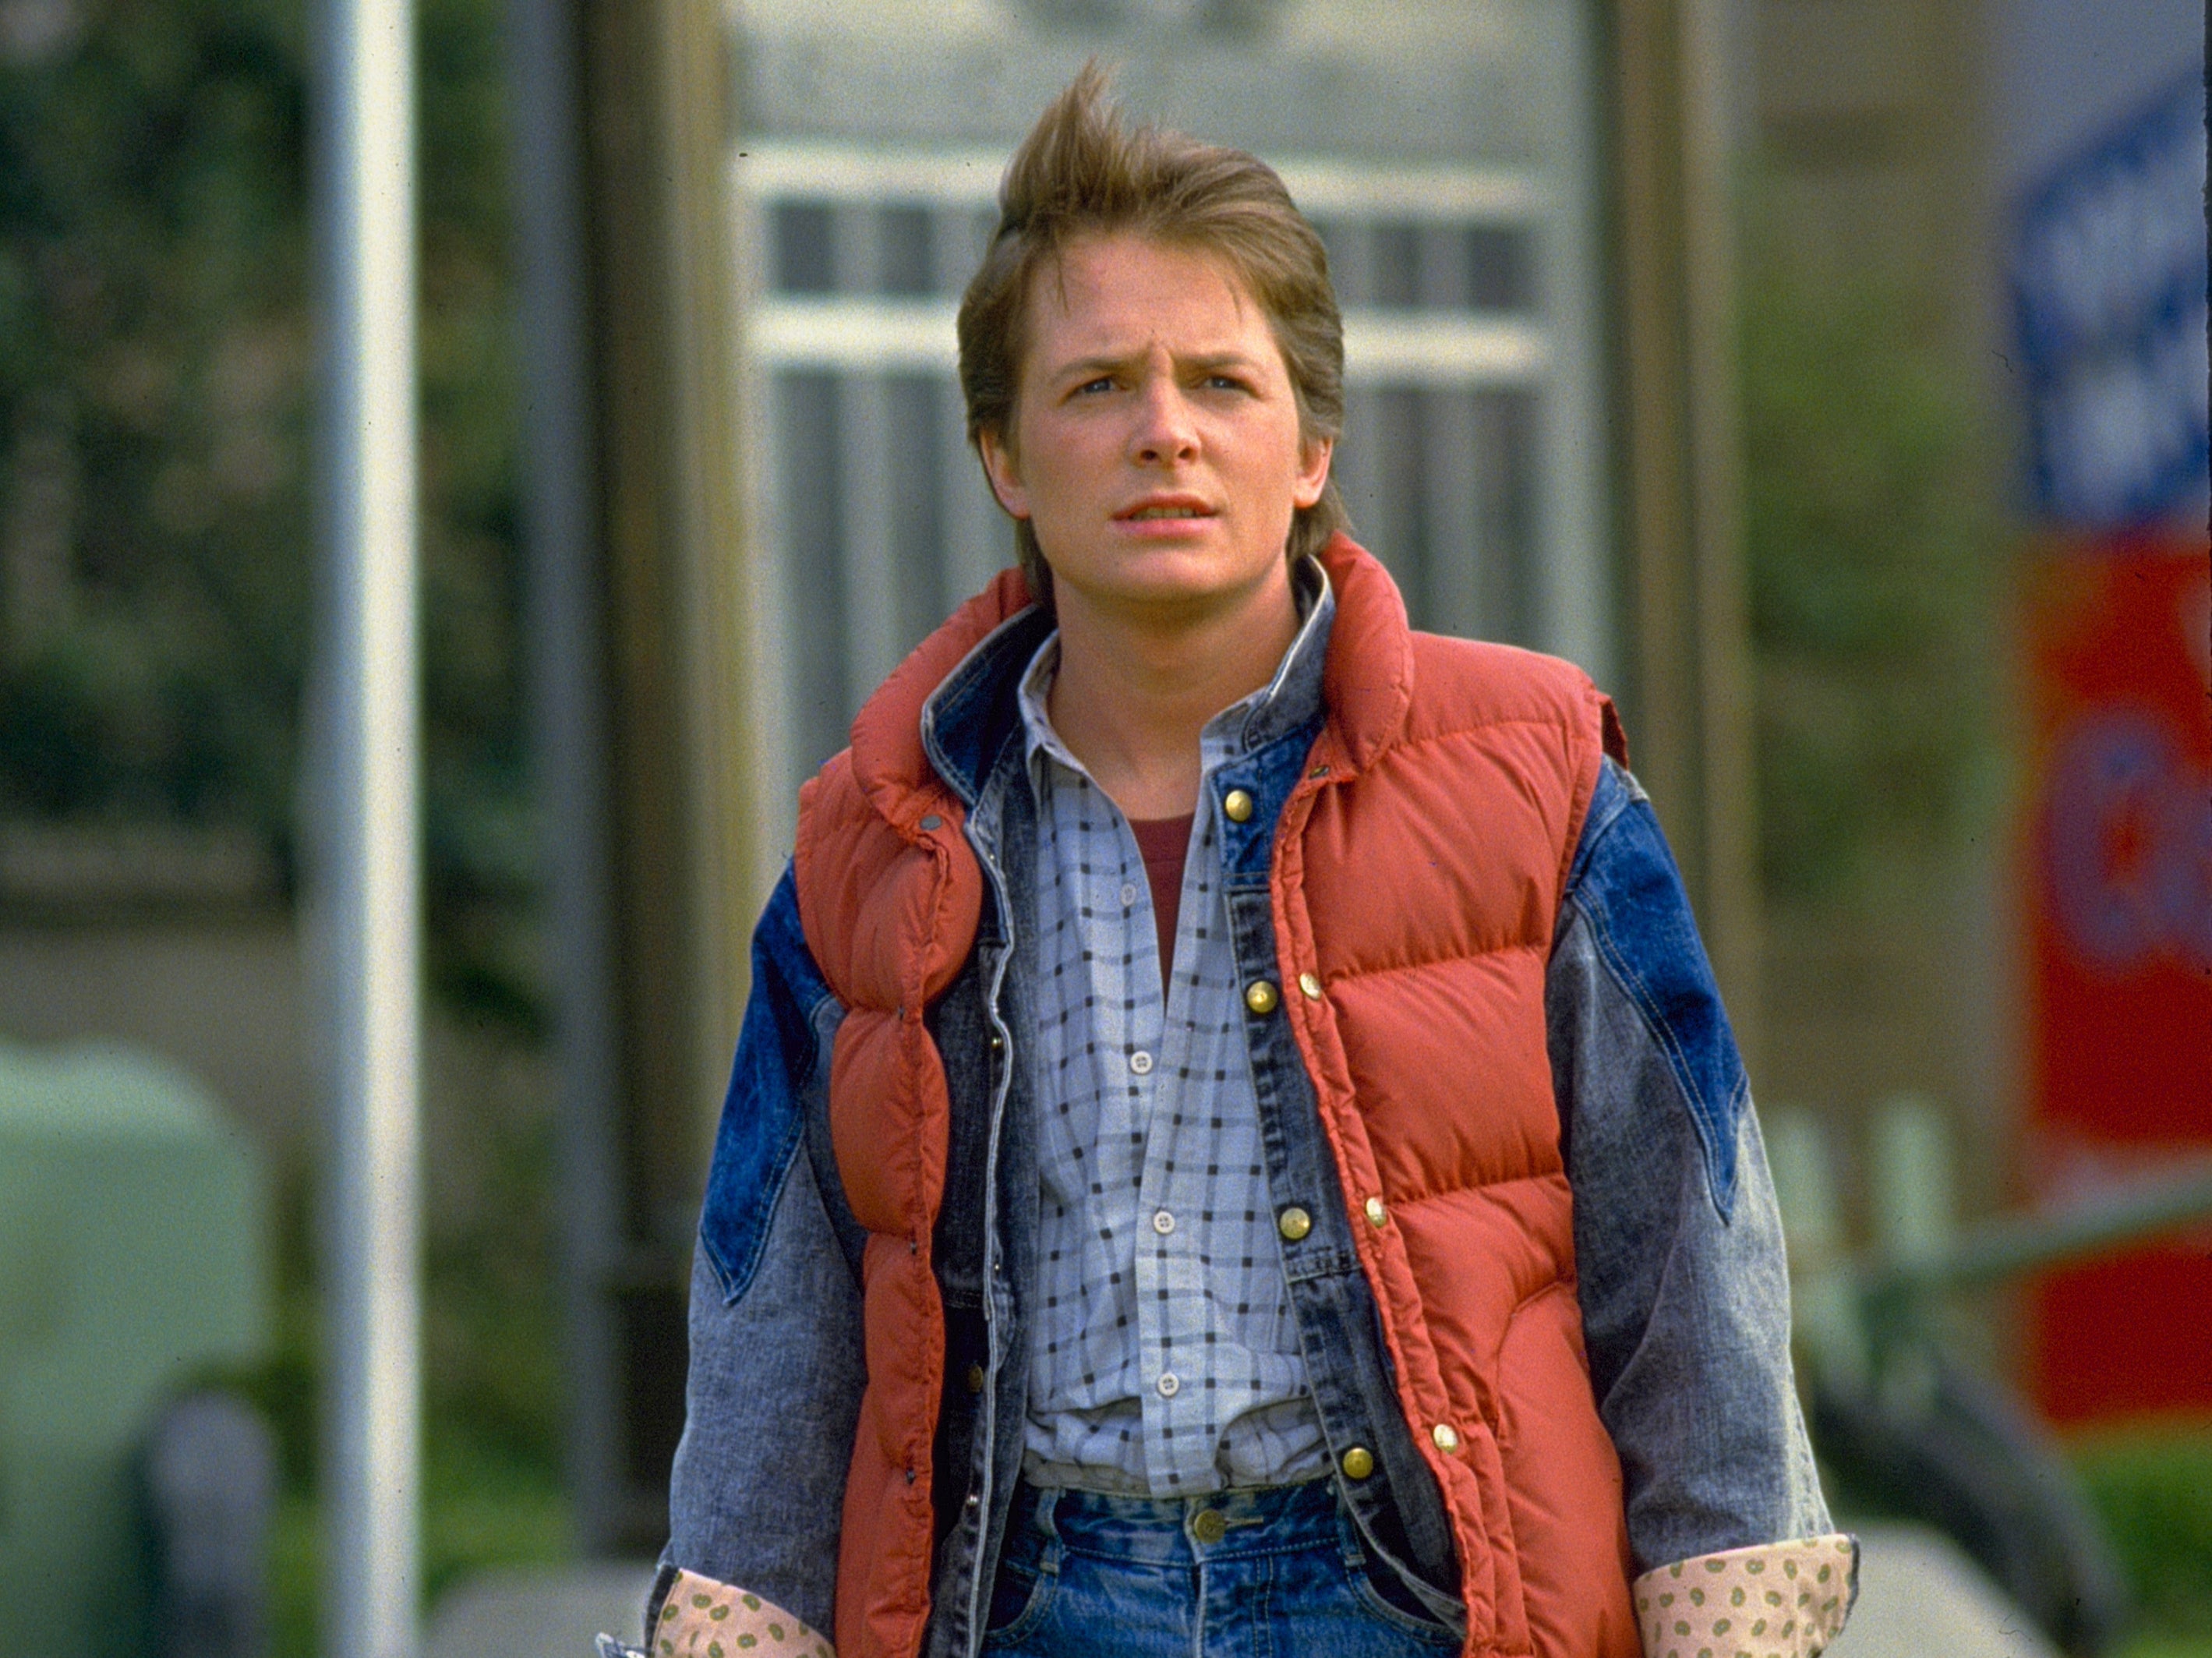 Michael J Fox as Marty McFly in ‘Back to the Future'